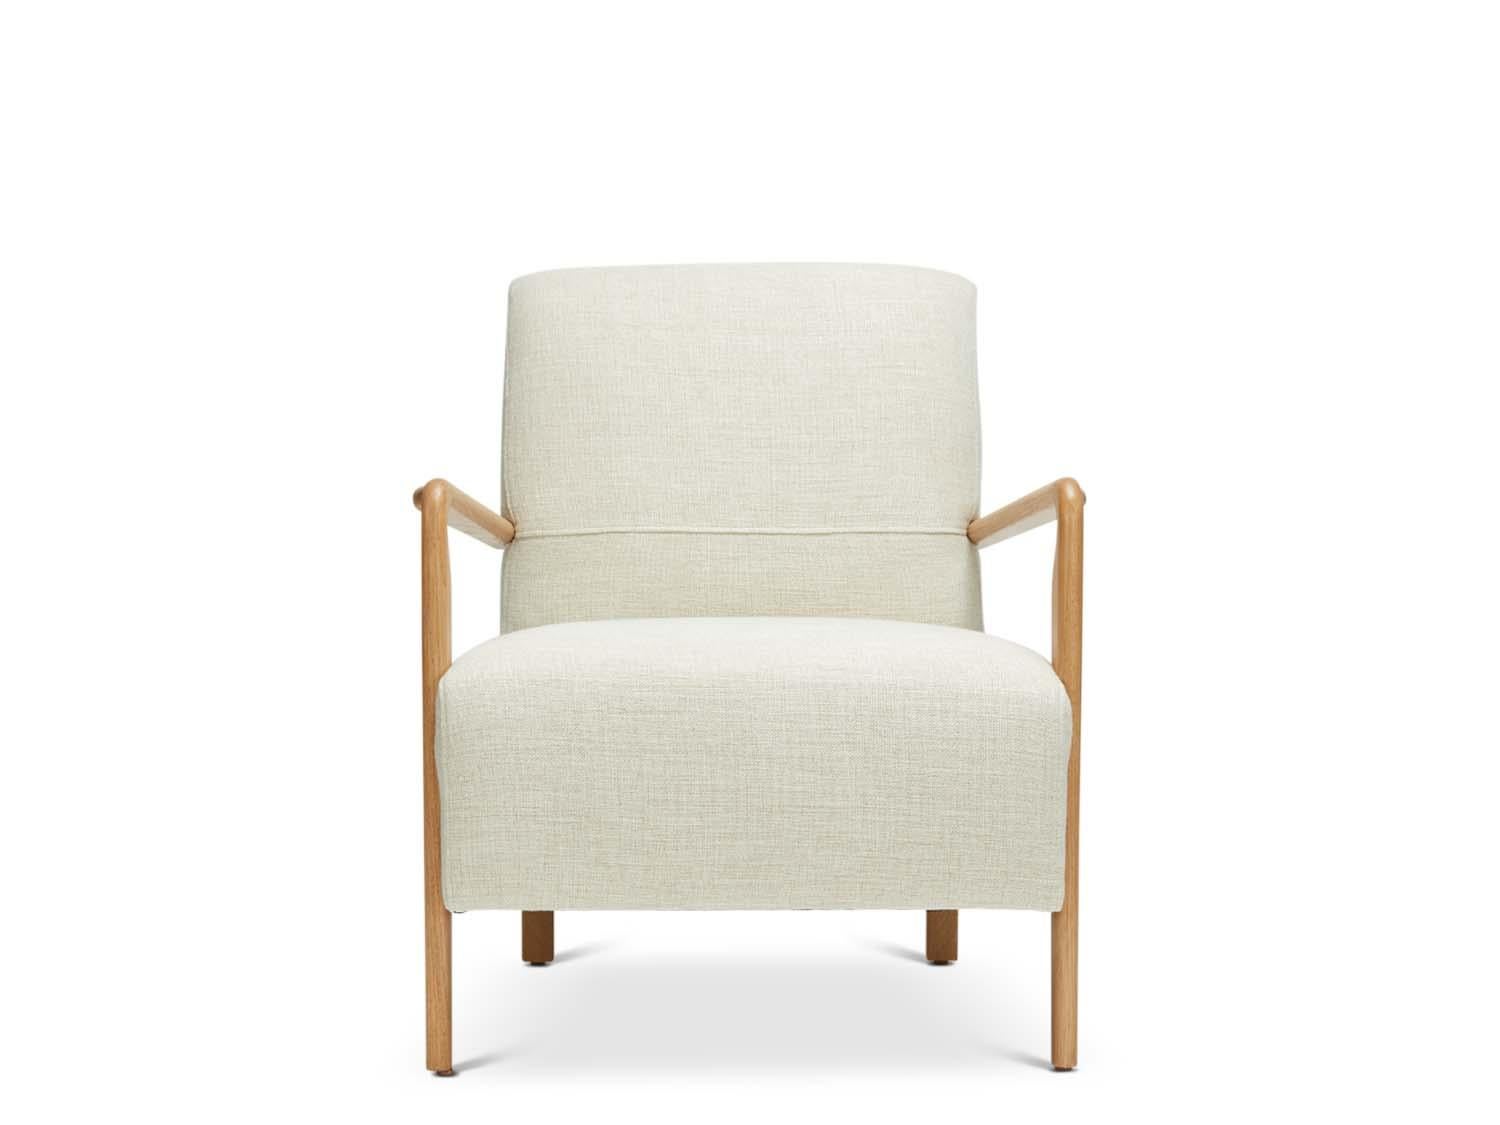 The Niguel lounge chair is a French inspired design with a sculptural solid wood frame and an upholstered seat. 

 The Lawson-Fenning Collection is designed and handmade in Los Angeles, California. Reach out to discover what options are currently in